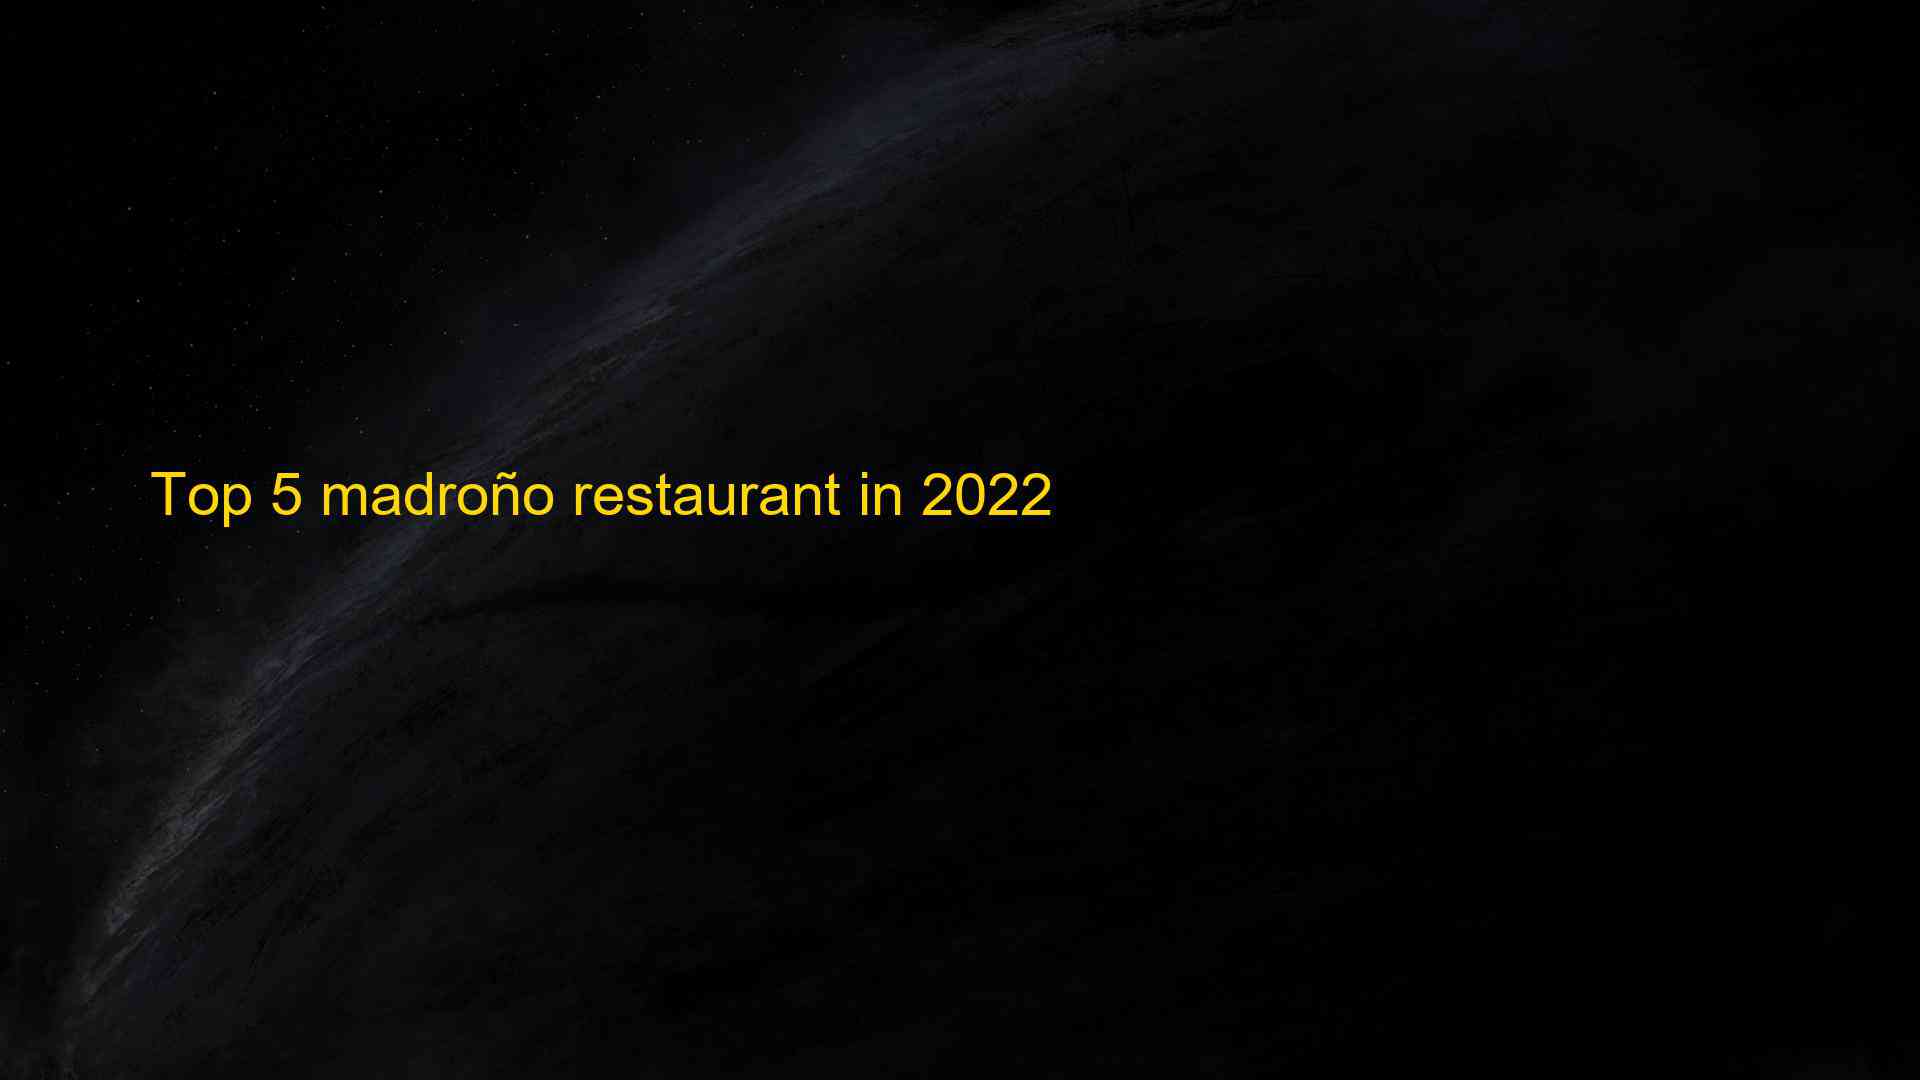 Top 5 madrono restaurant in 2022 1663515421